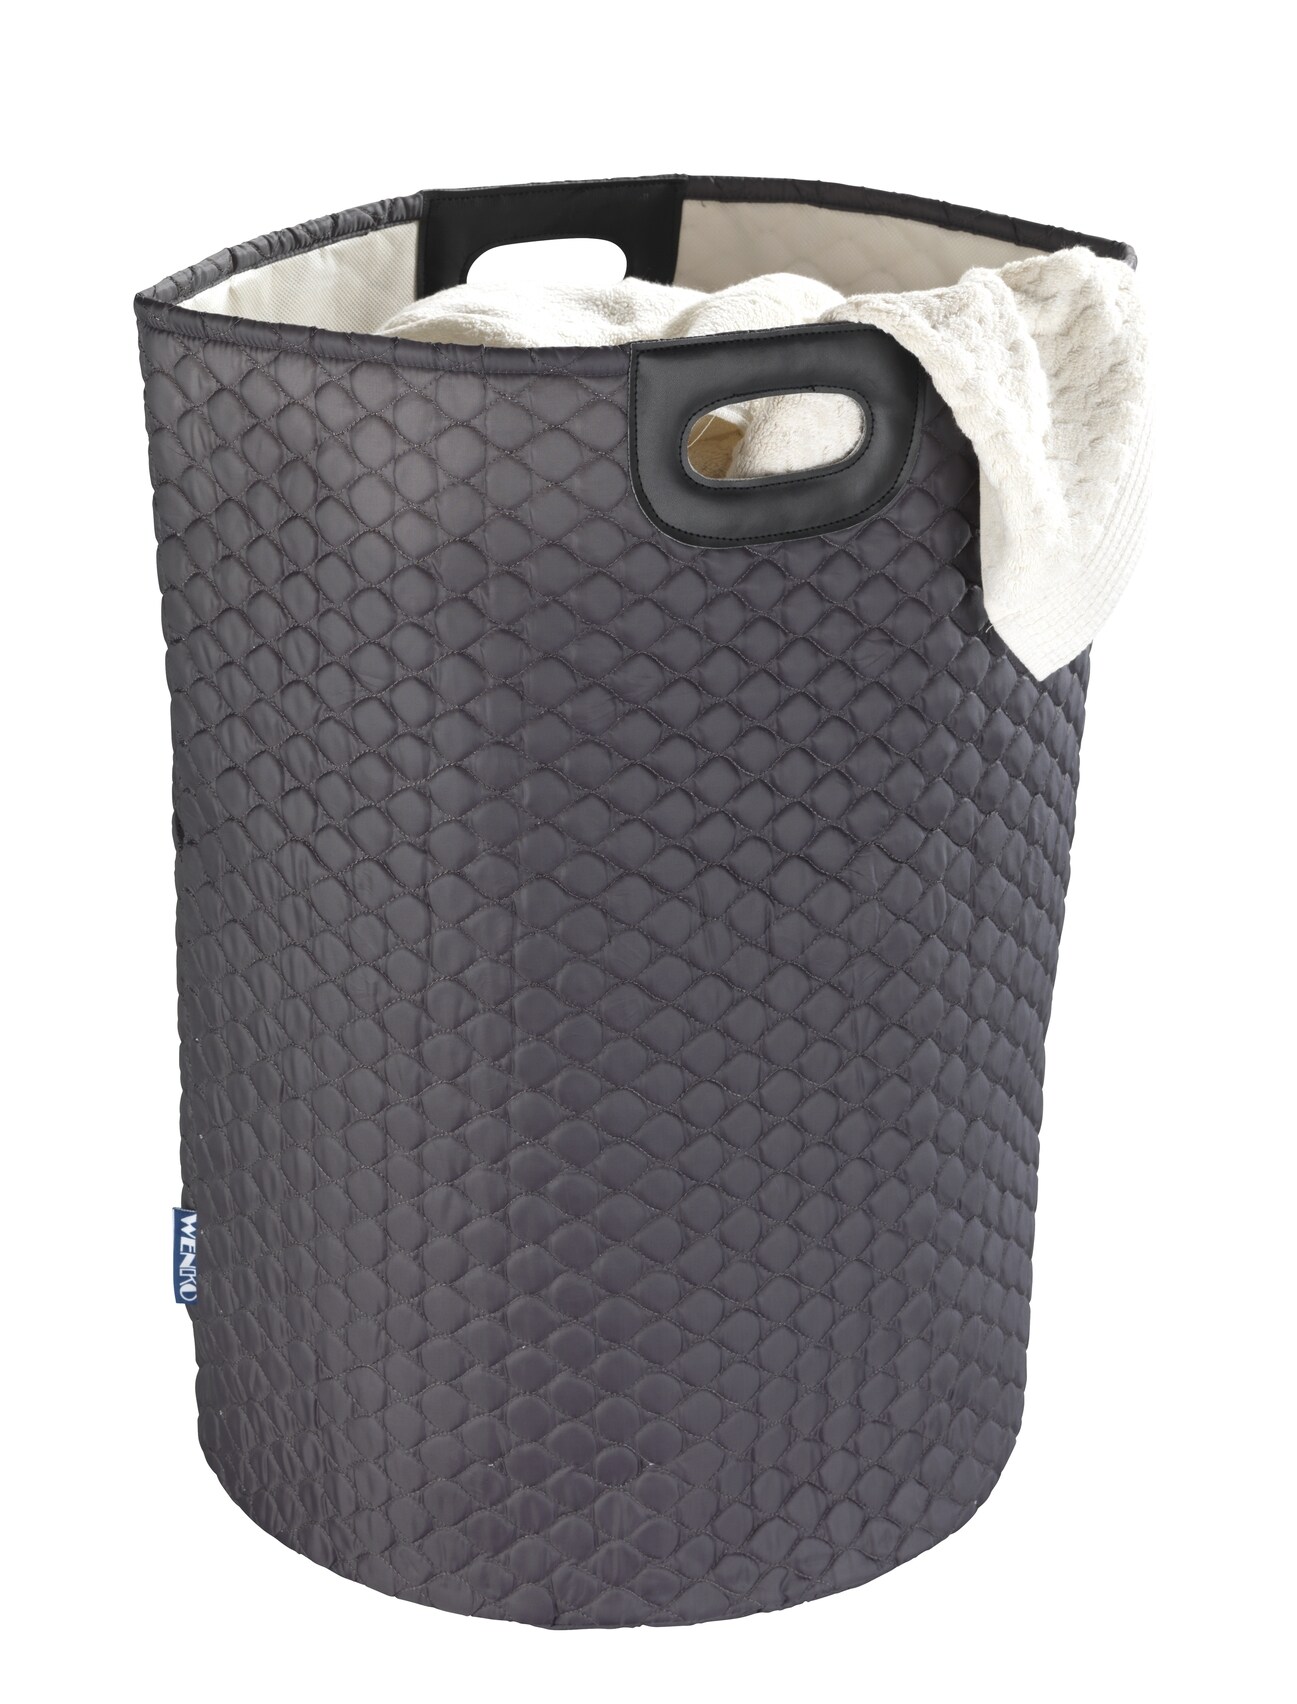 Foldable Clothes Bag Details about   Collapsible Fabric Laundry Hamper Washing Bin Basket 